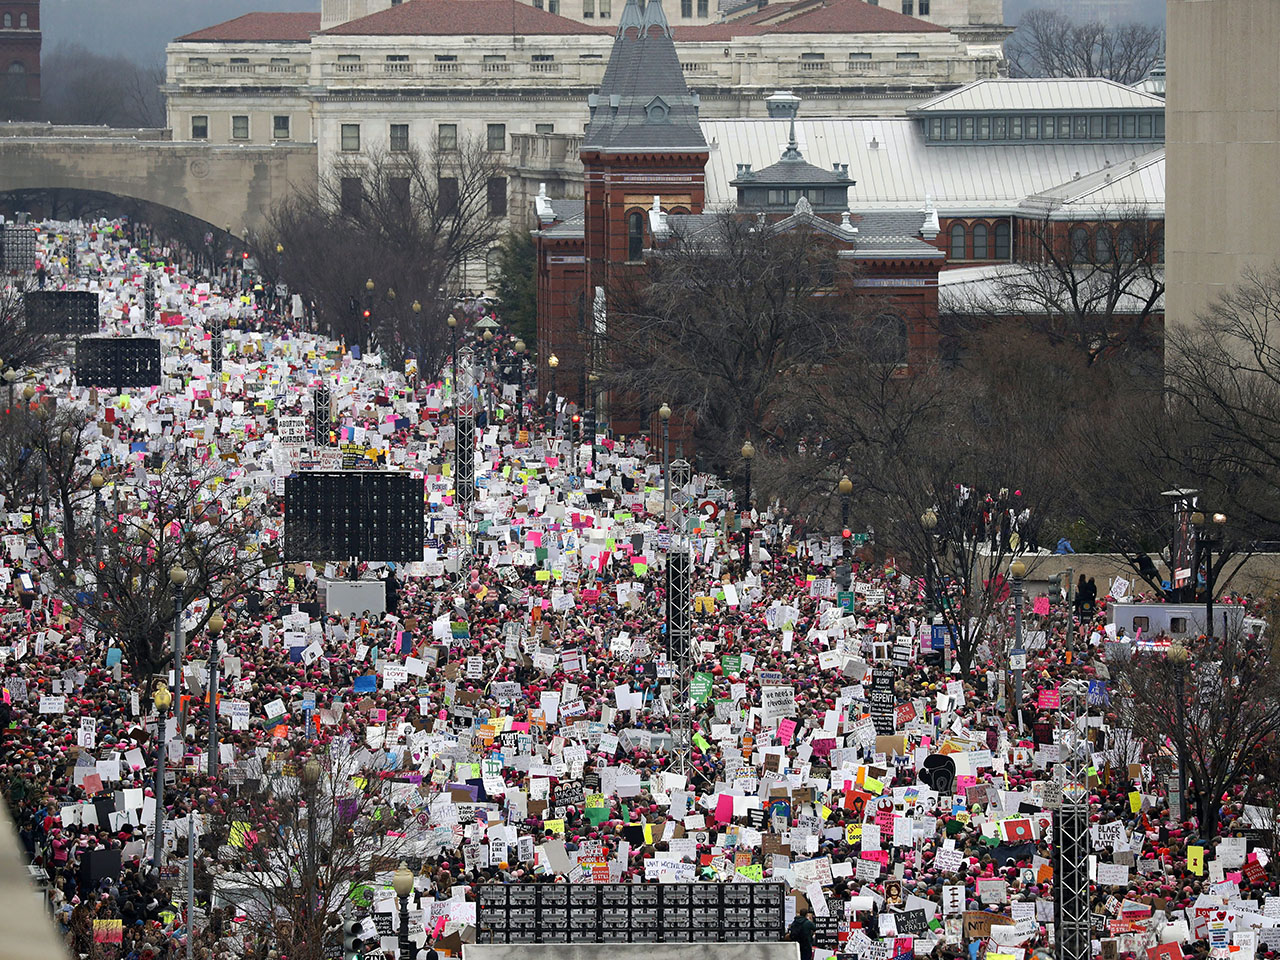 A crowd at the Women's March on Washington